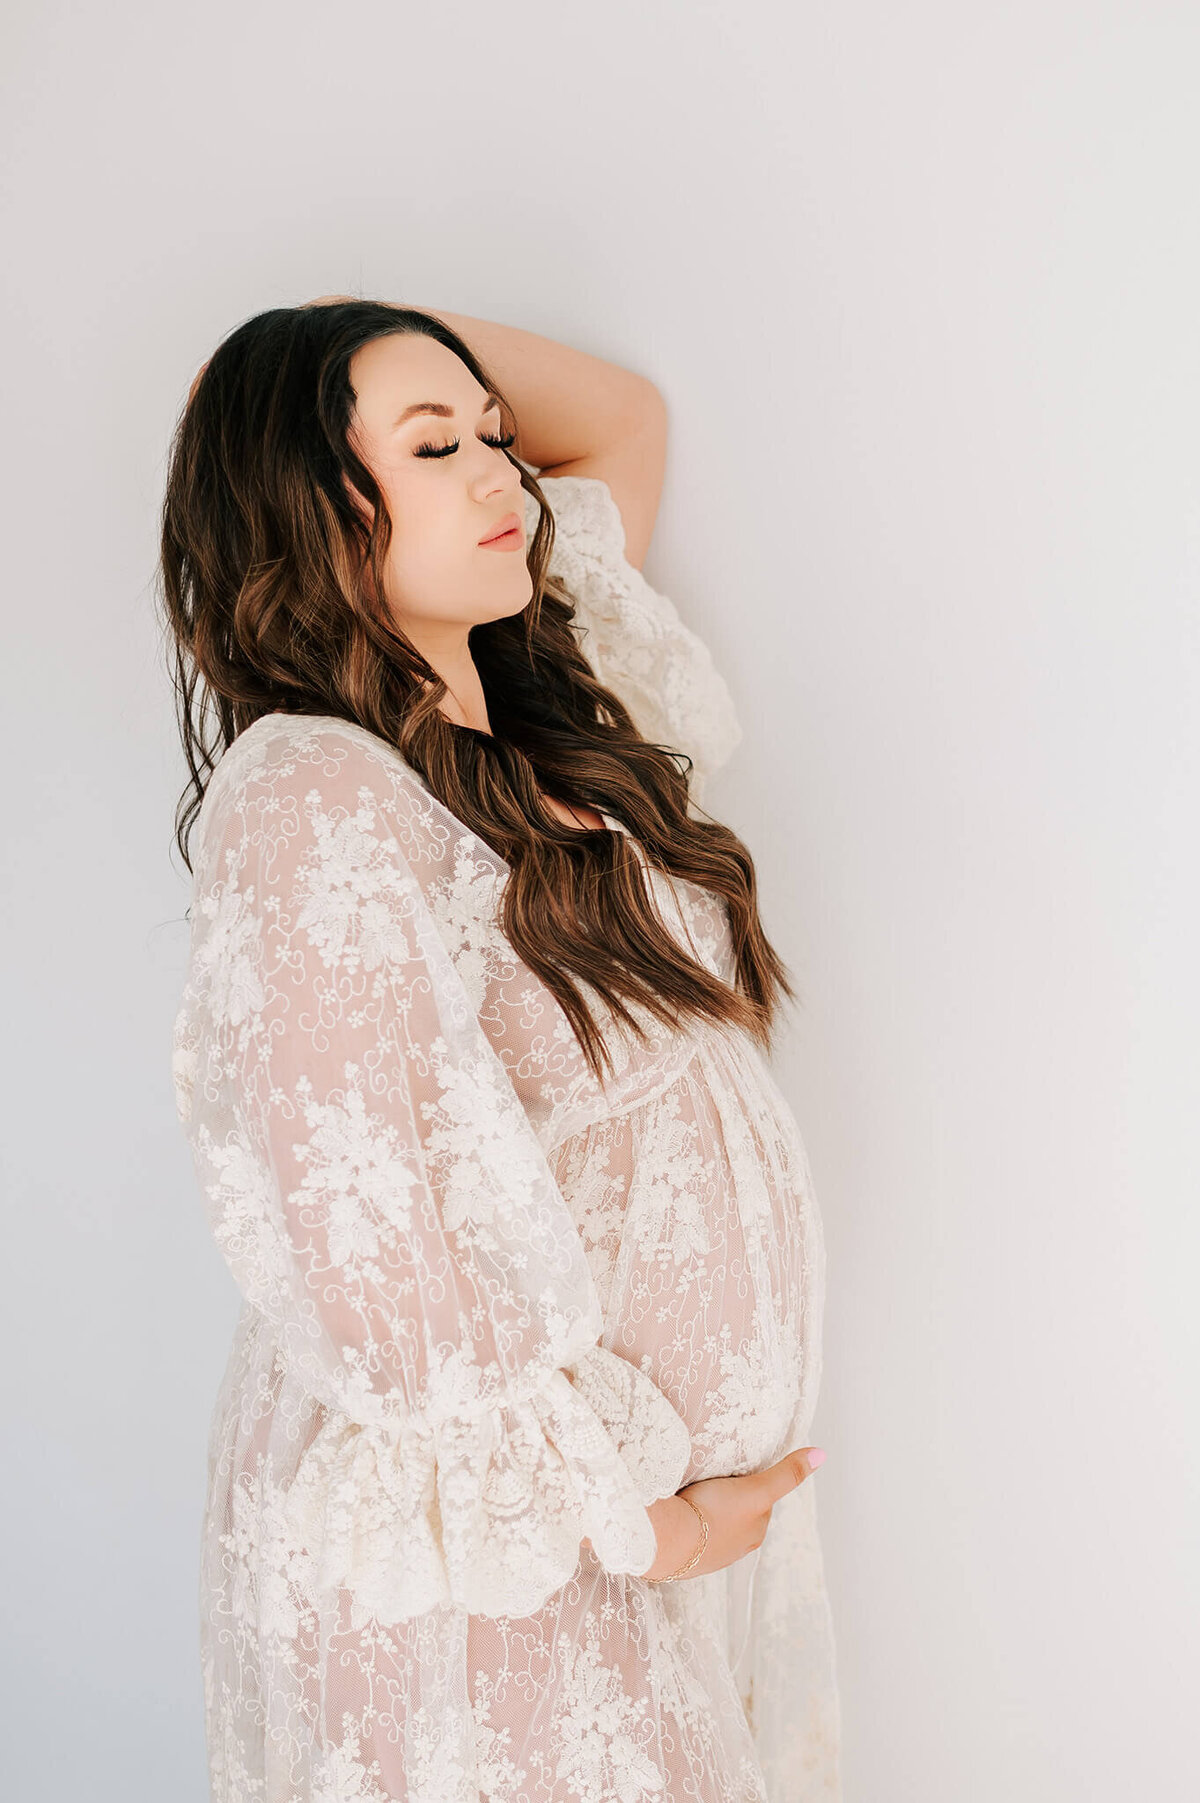 Springfield MO maternity photographer Jessica Kennedy of The XO Photography captures pregnant mom in lace dress brushing hair